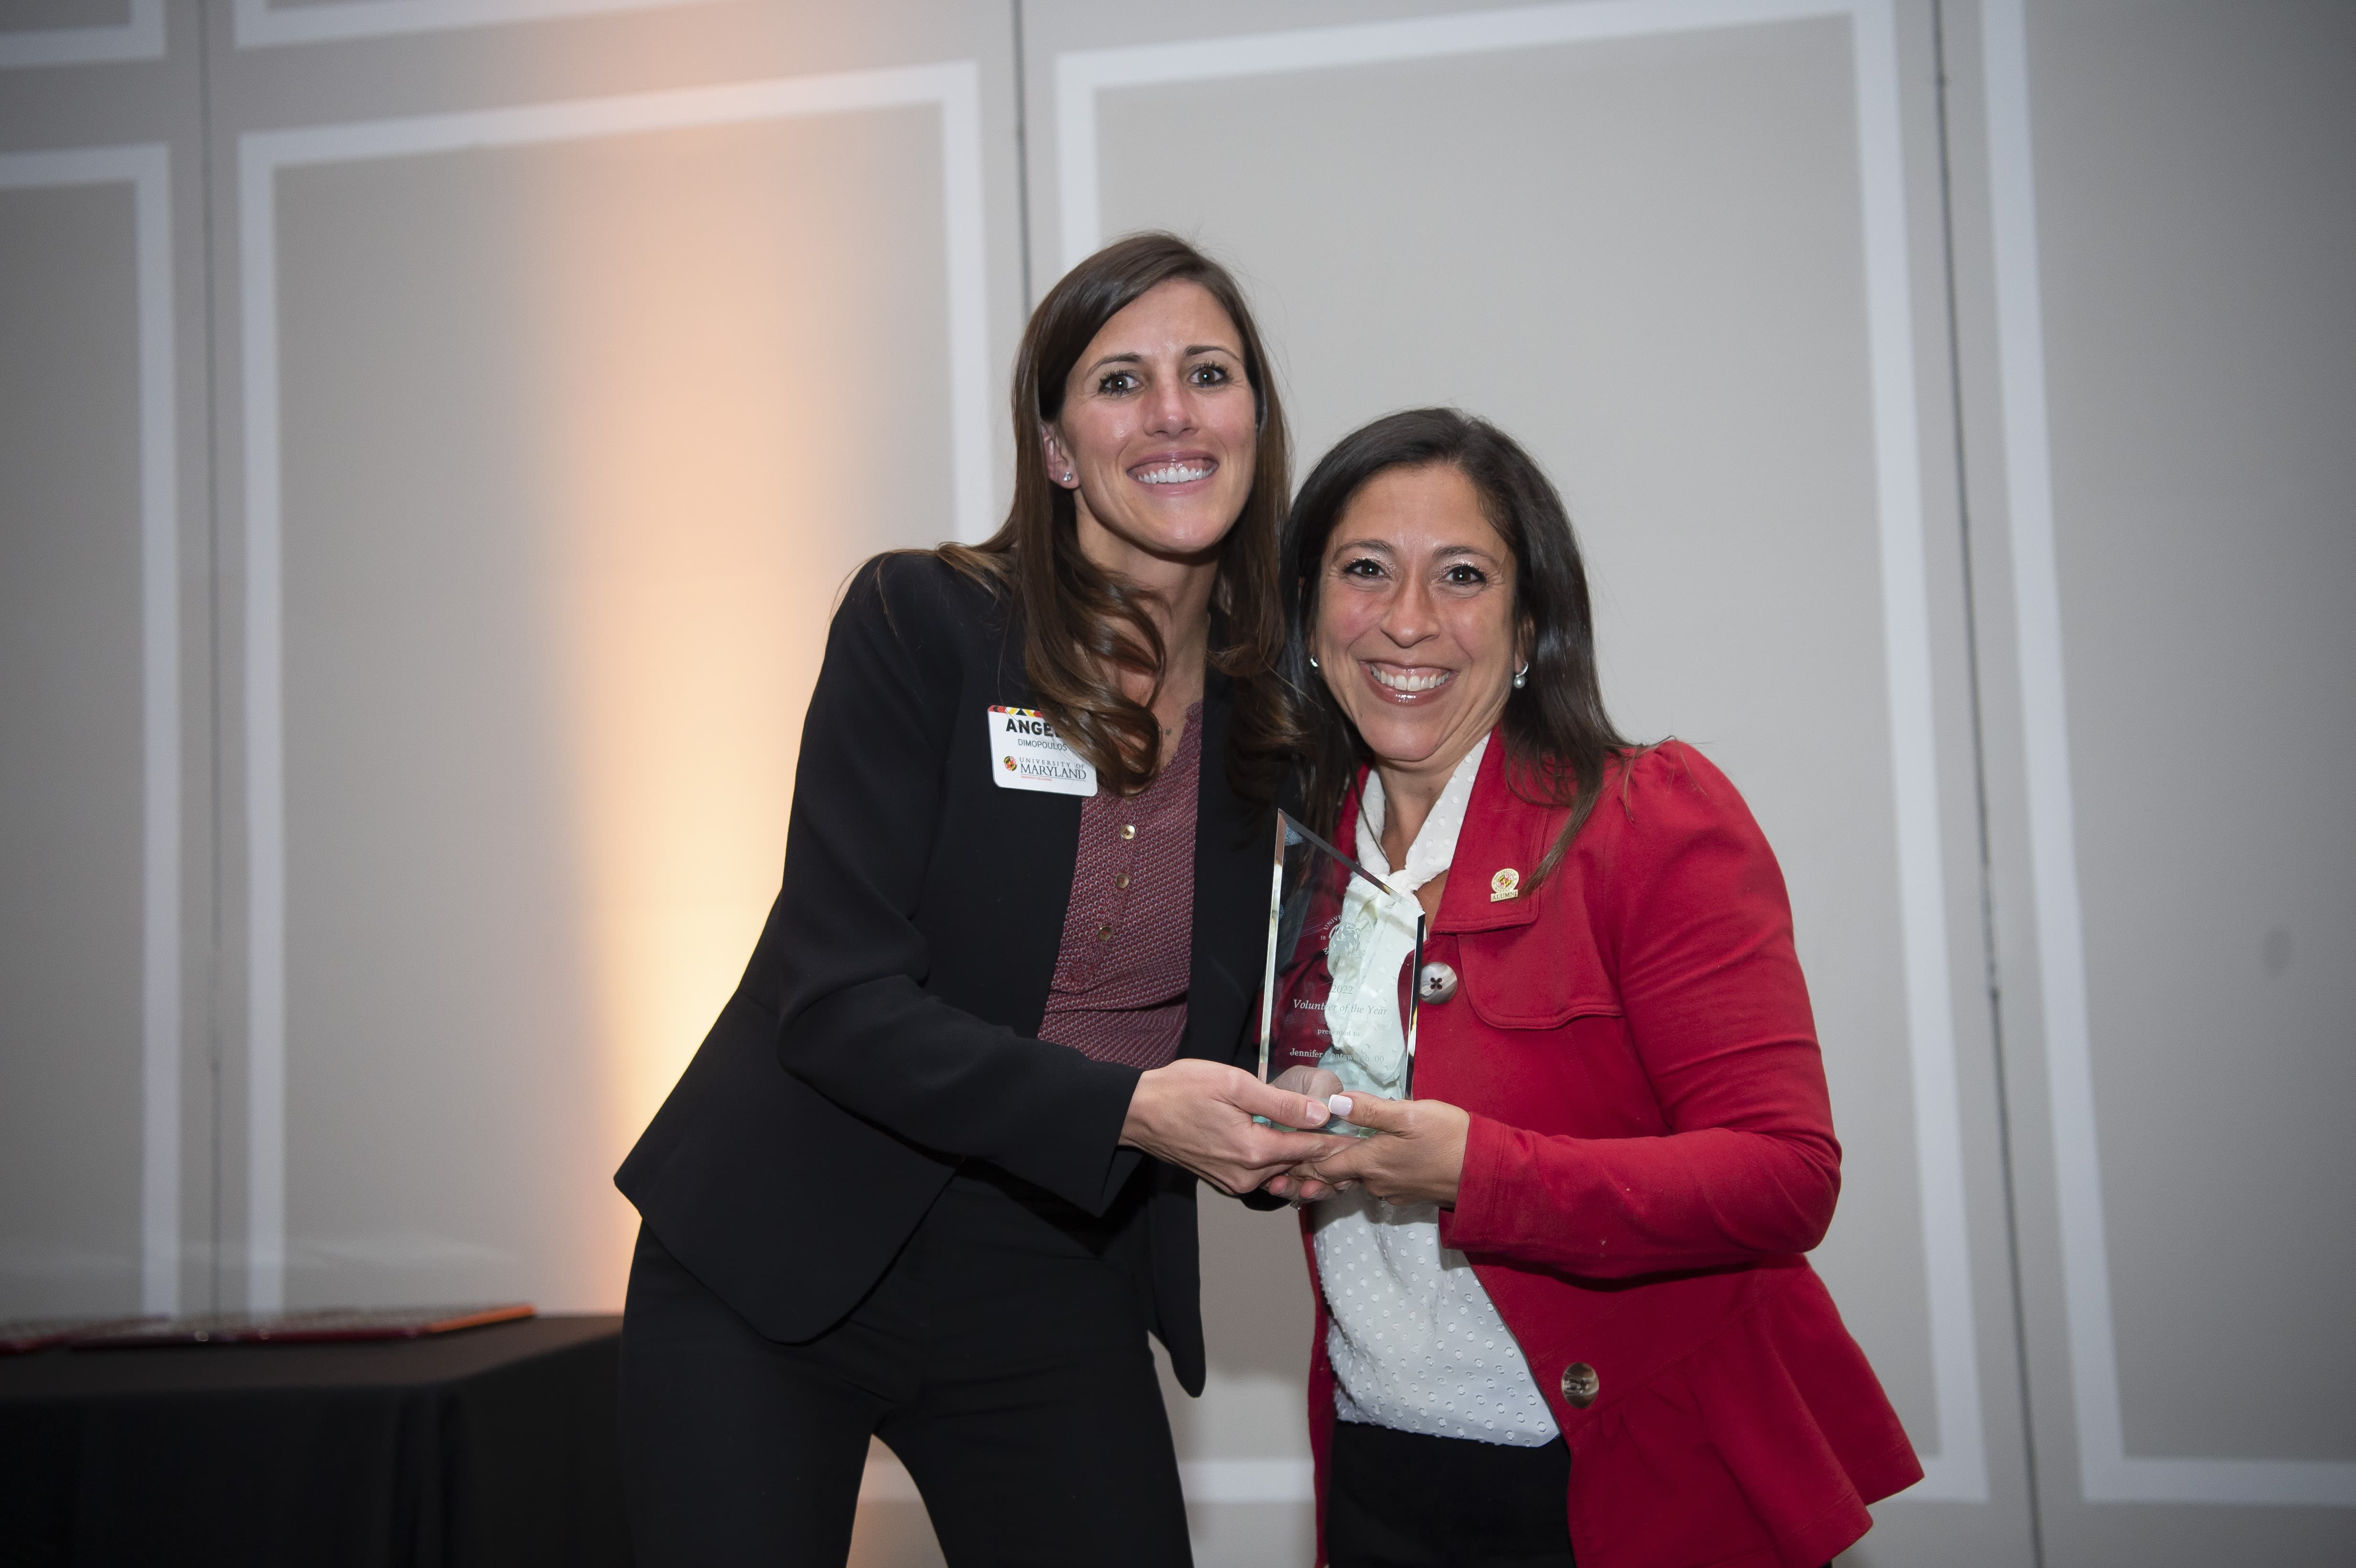 Pictured is Angela Dimopolous (left) and Jennifer Coatsworth (right), as Coatsworth receives the Volunteer of the Year Award at the 2022 UMDAA Volunteer Leadership Awards